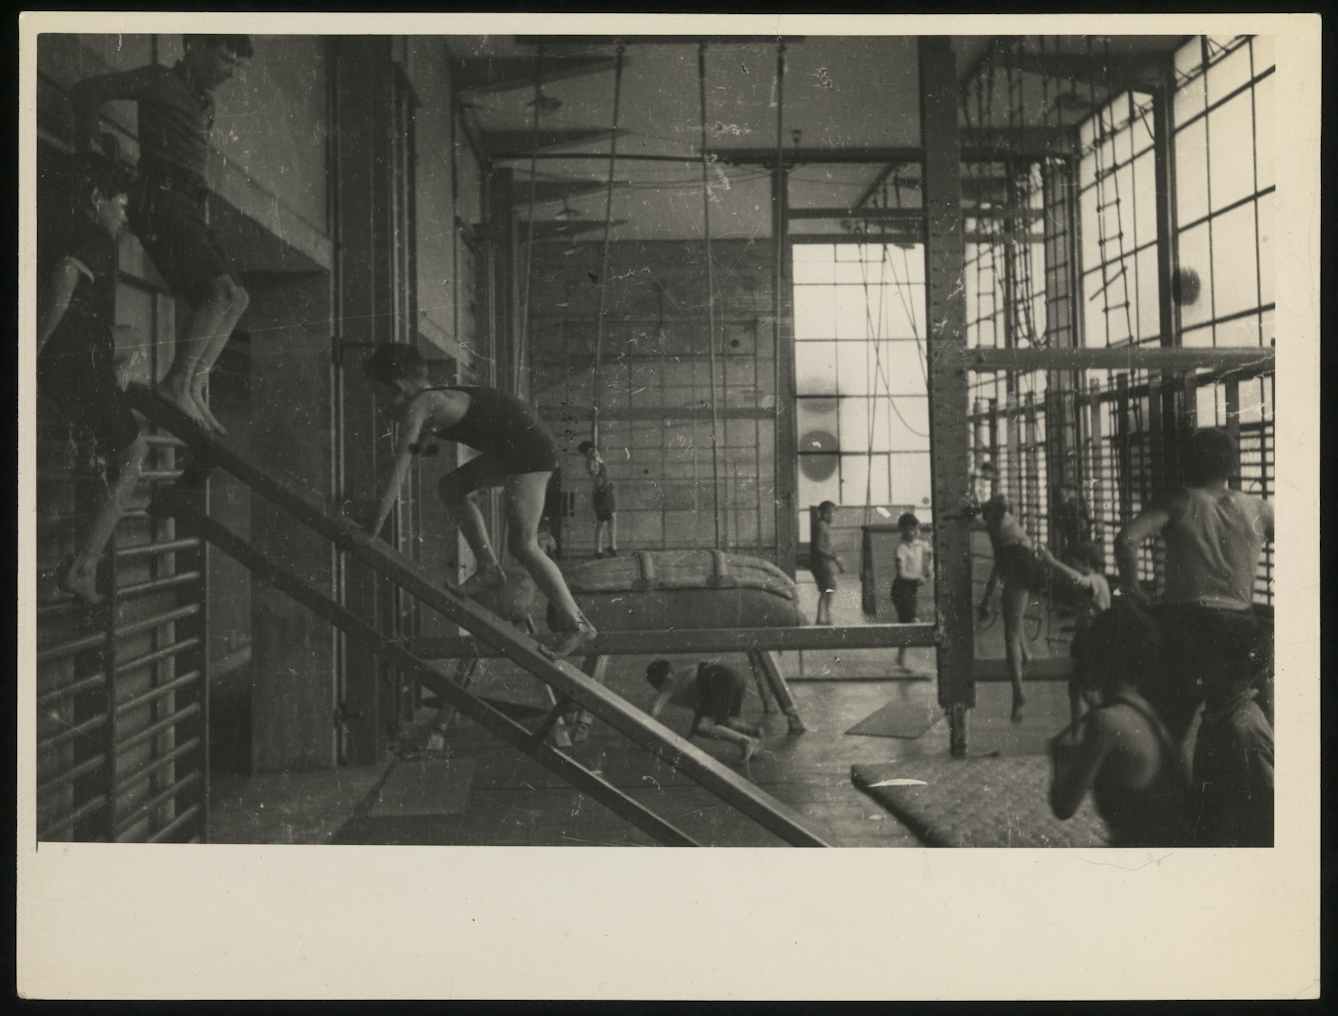 Black and white photograph showing boys and young men exercising in a gymnasium.